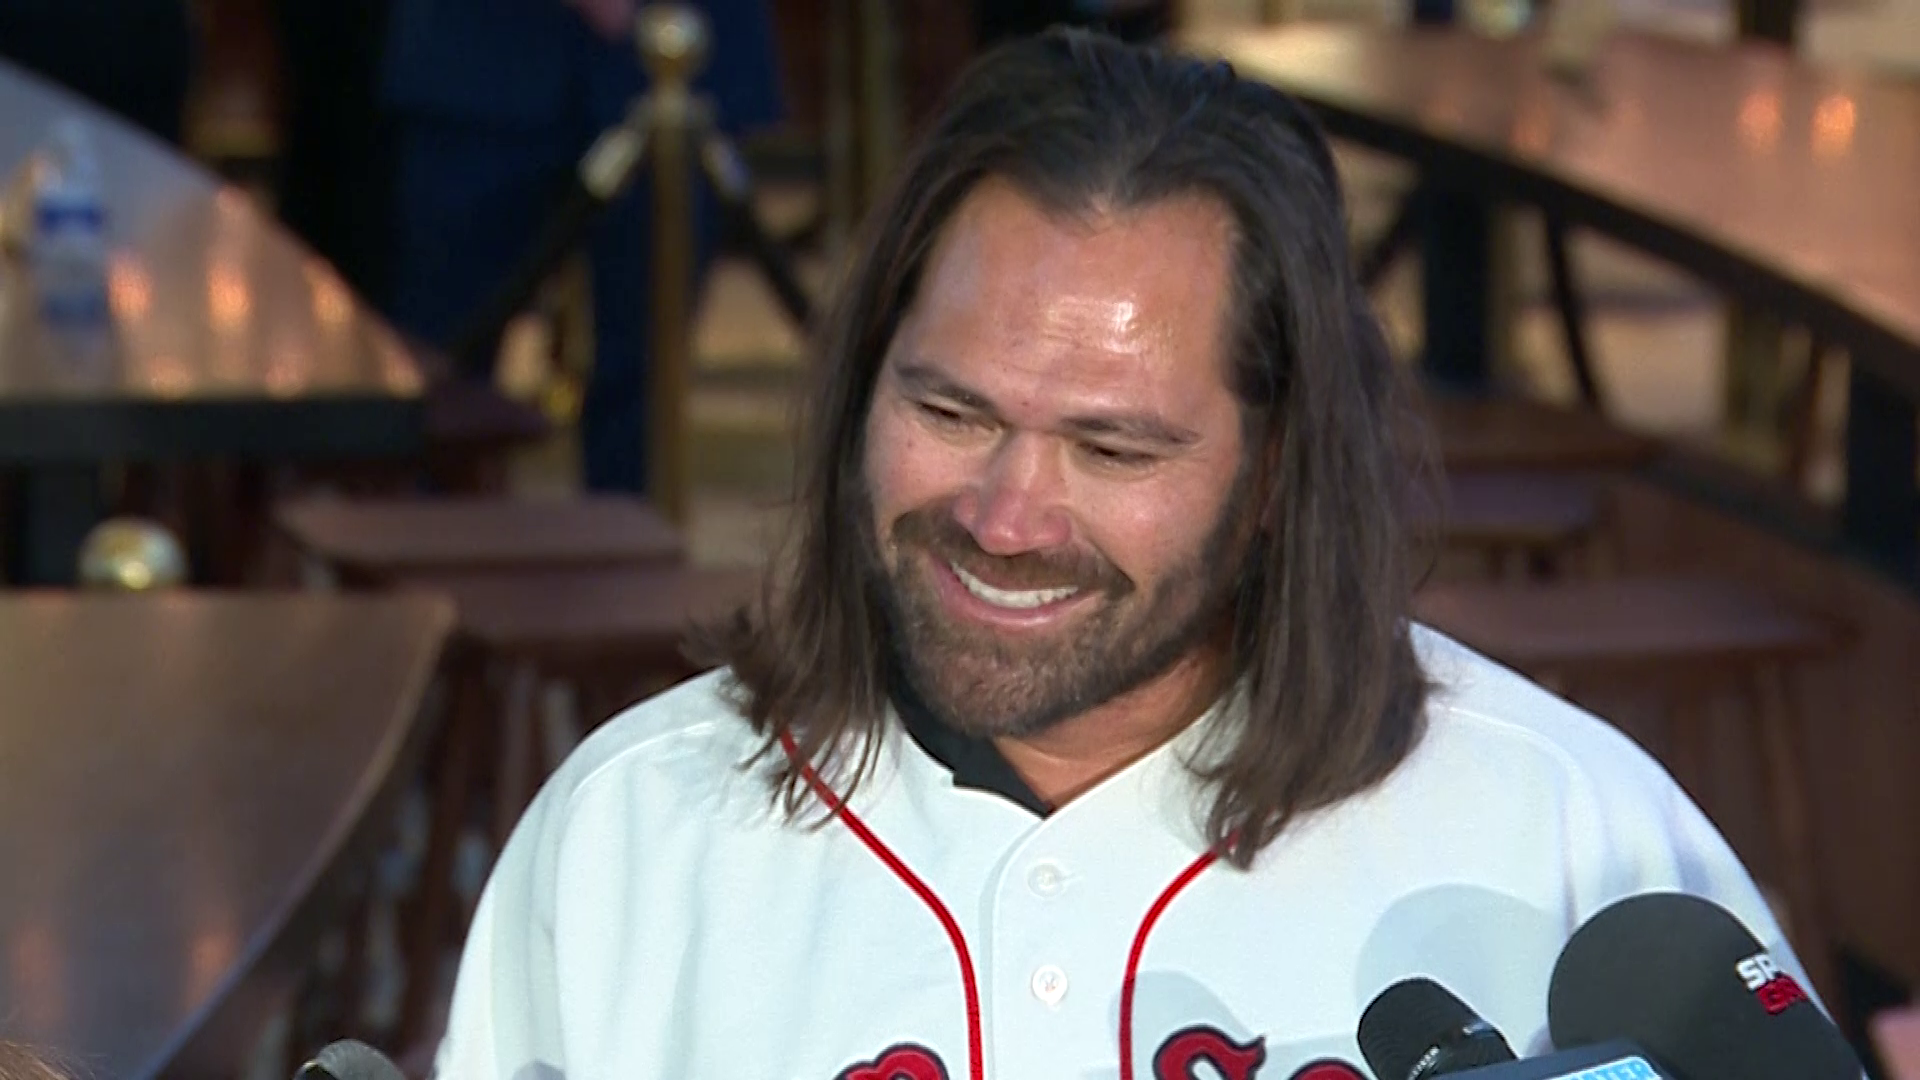 Hard Feelings Between Red Sox Owner And Johnny Damon?